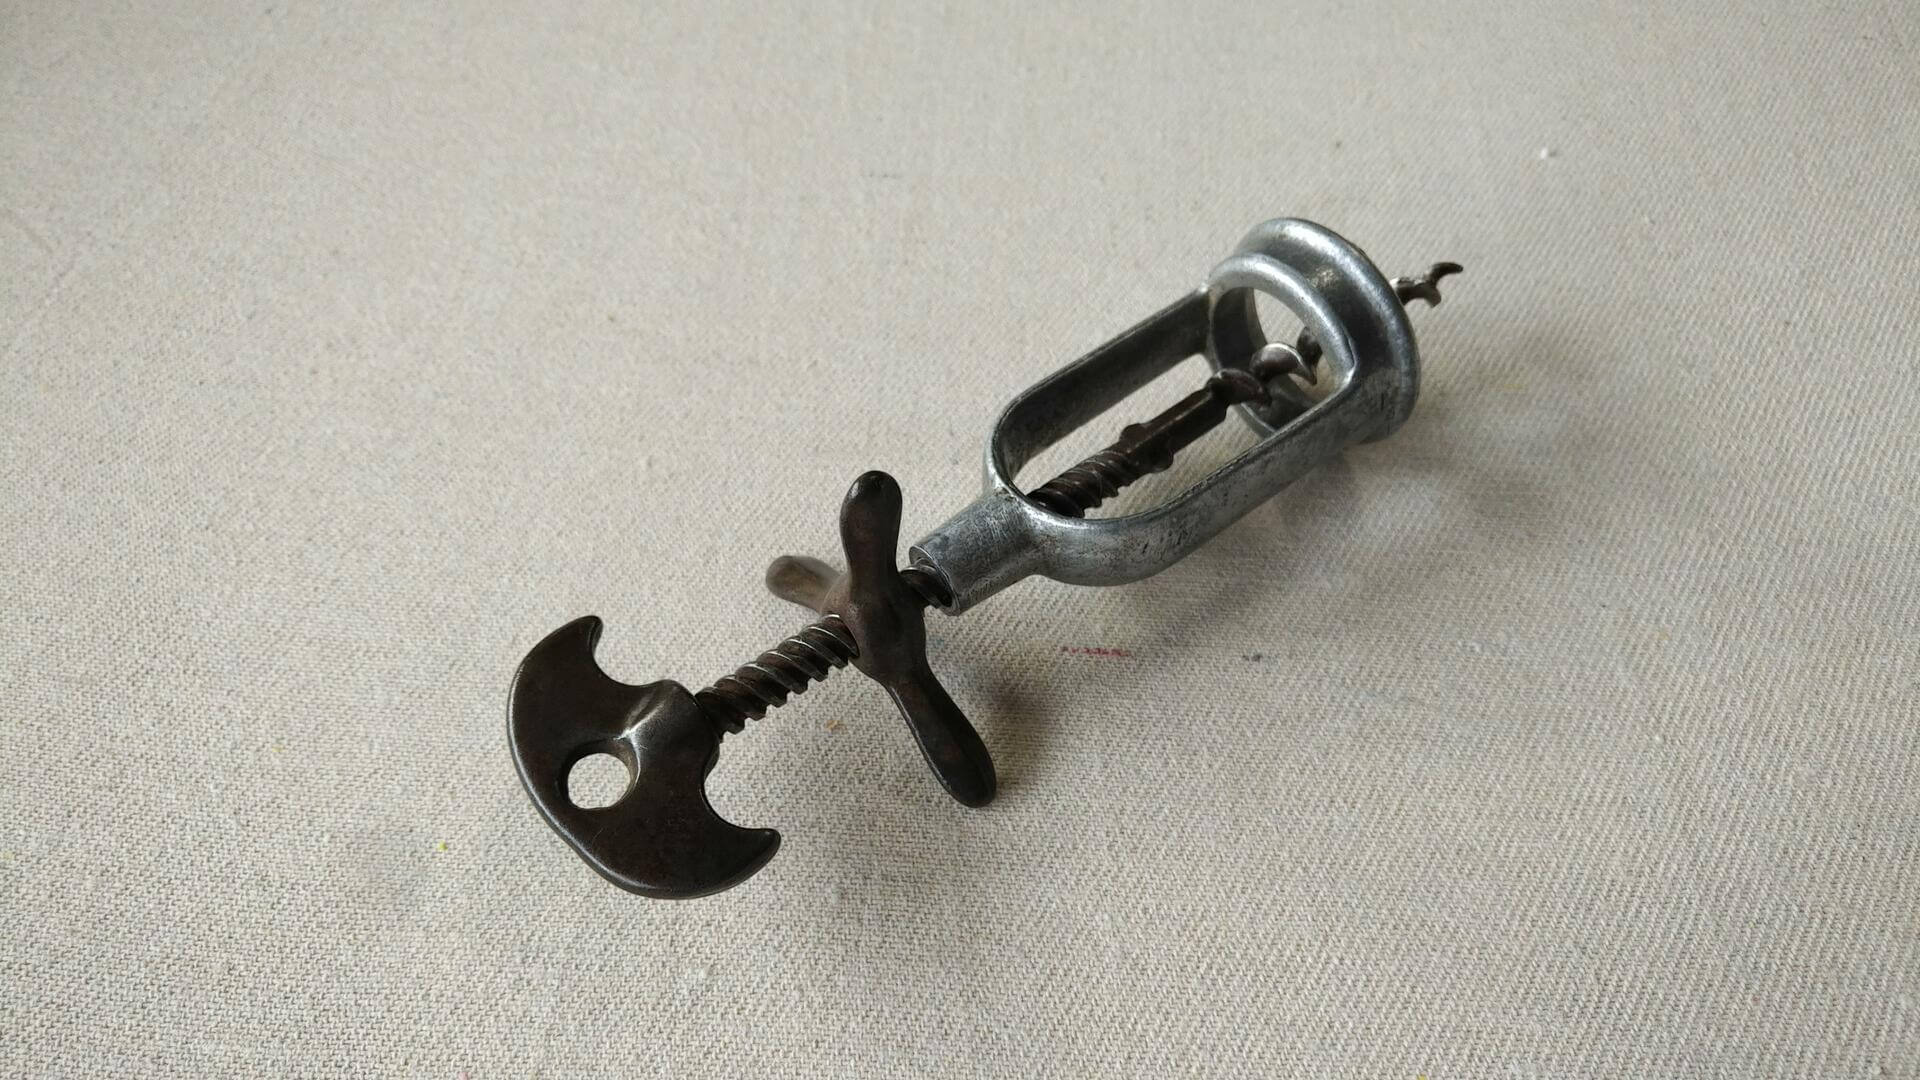 Beautiful antique Napoleon hat French triple fixed wingnut style open frame corkscrew bottle opener. Rare vintage barware & breweriana collectible